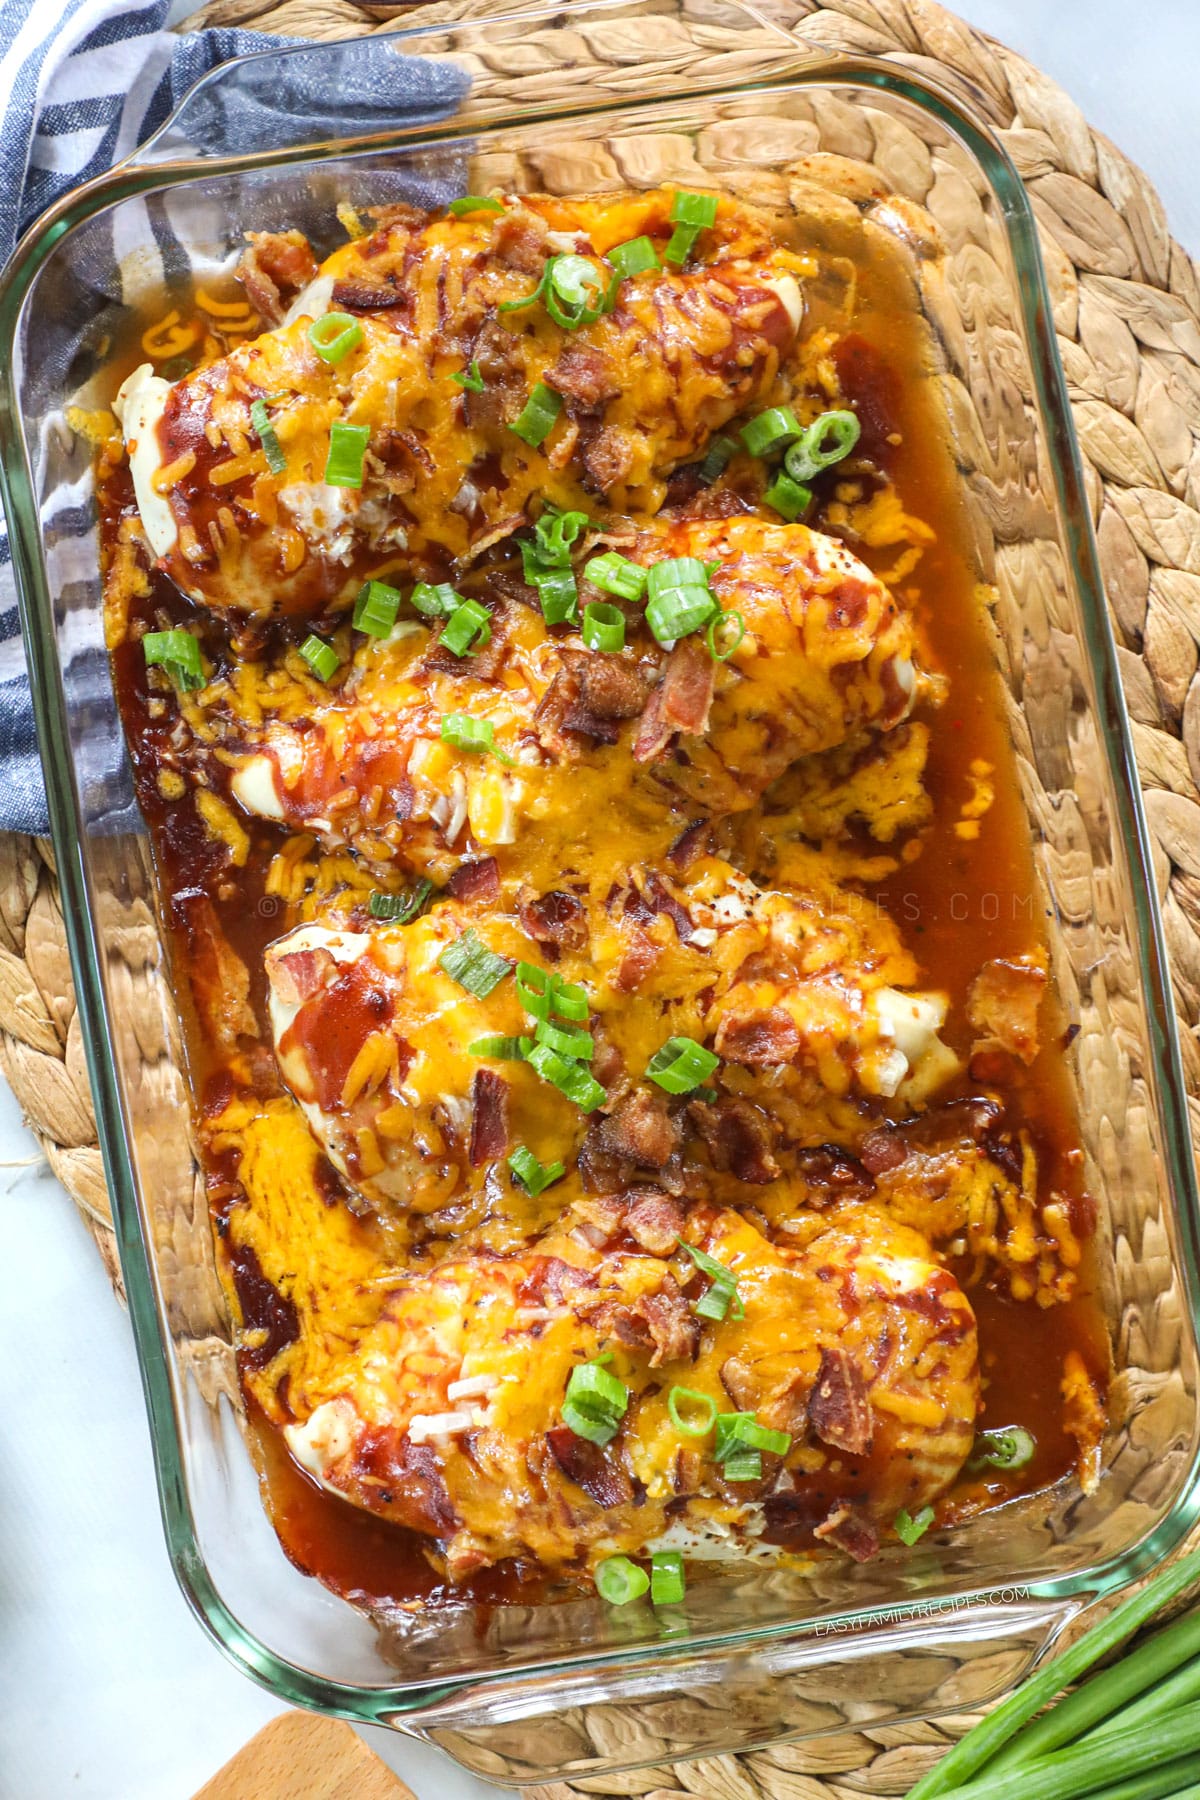 Mesquite chicken recipe made in a baking dish